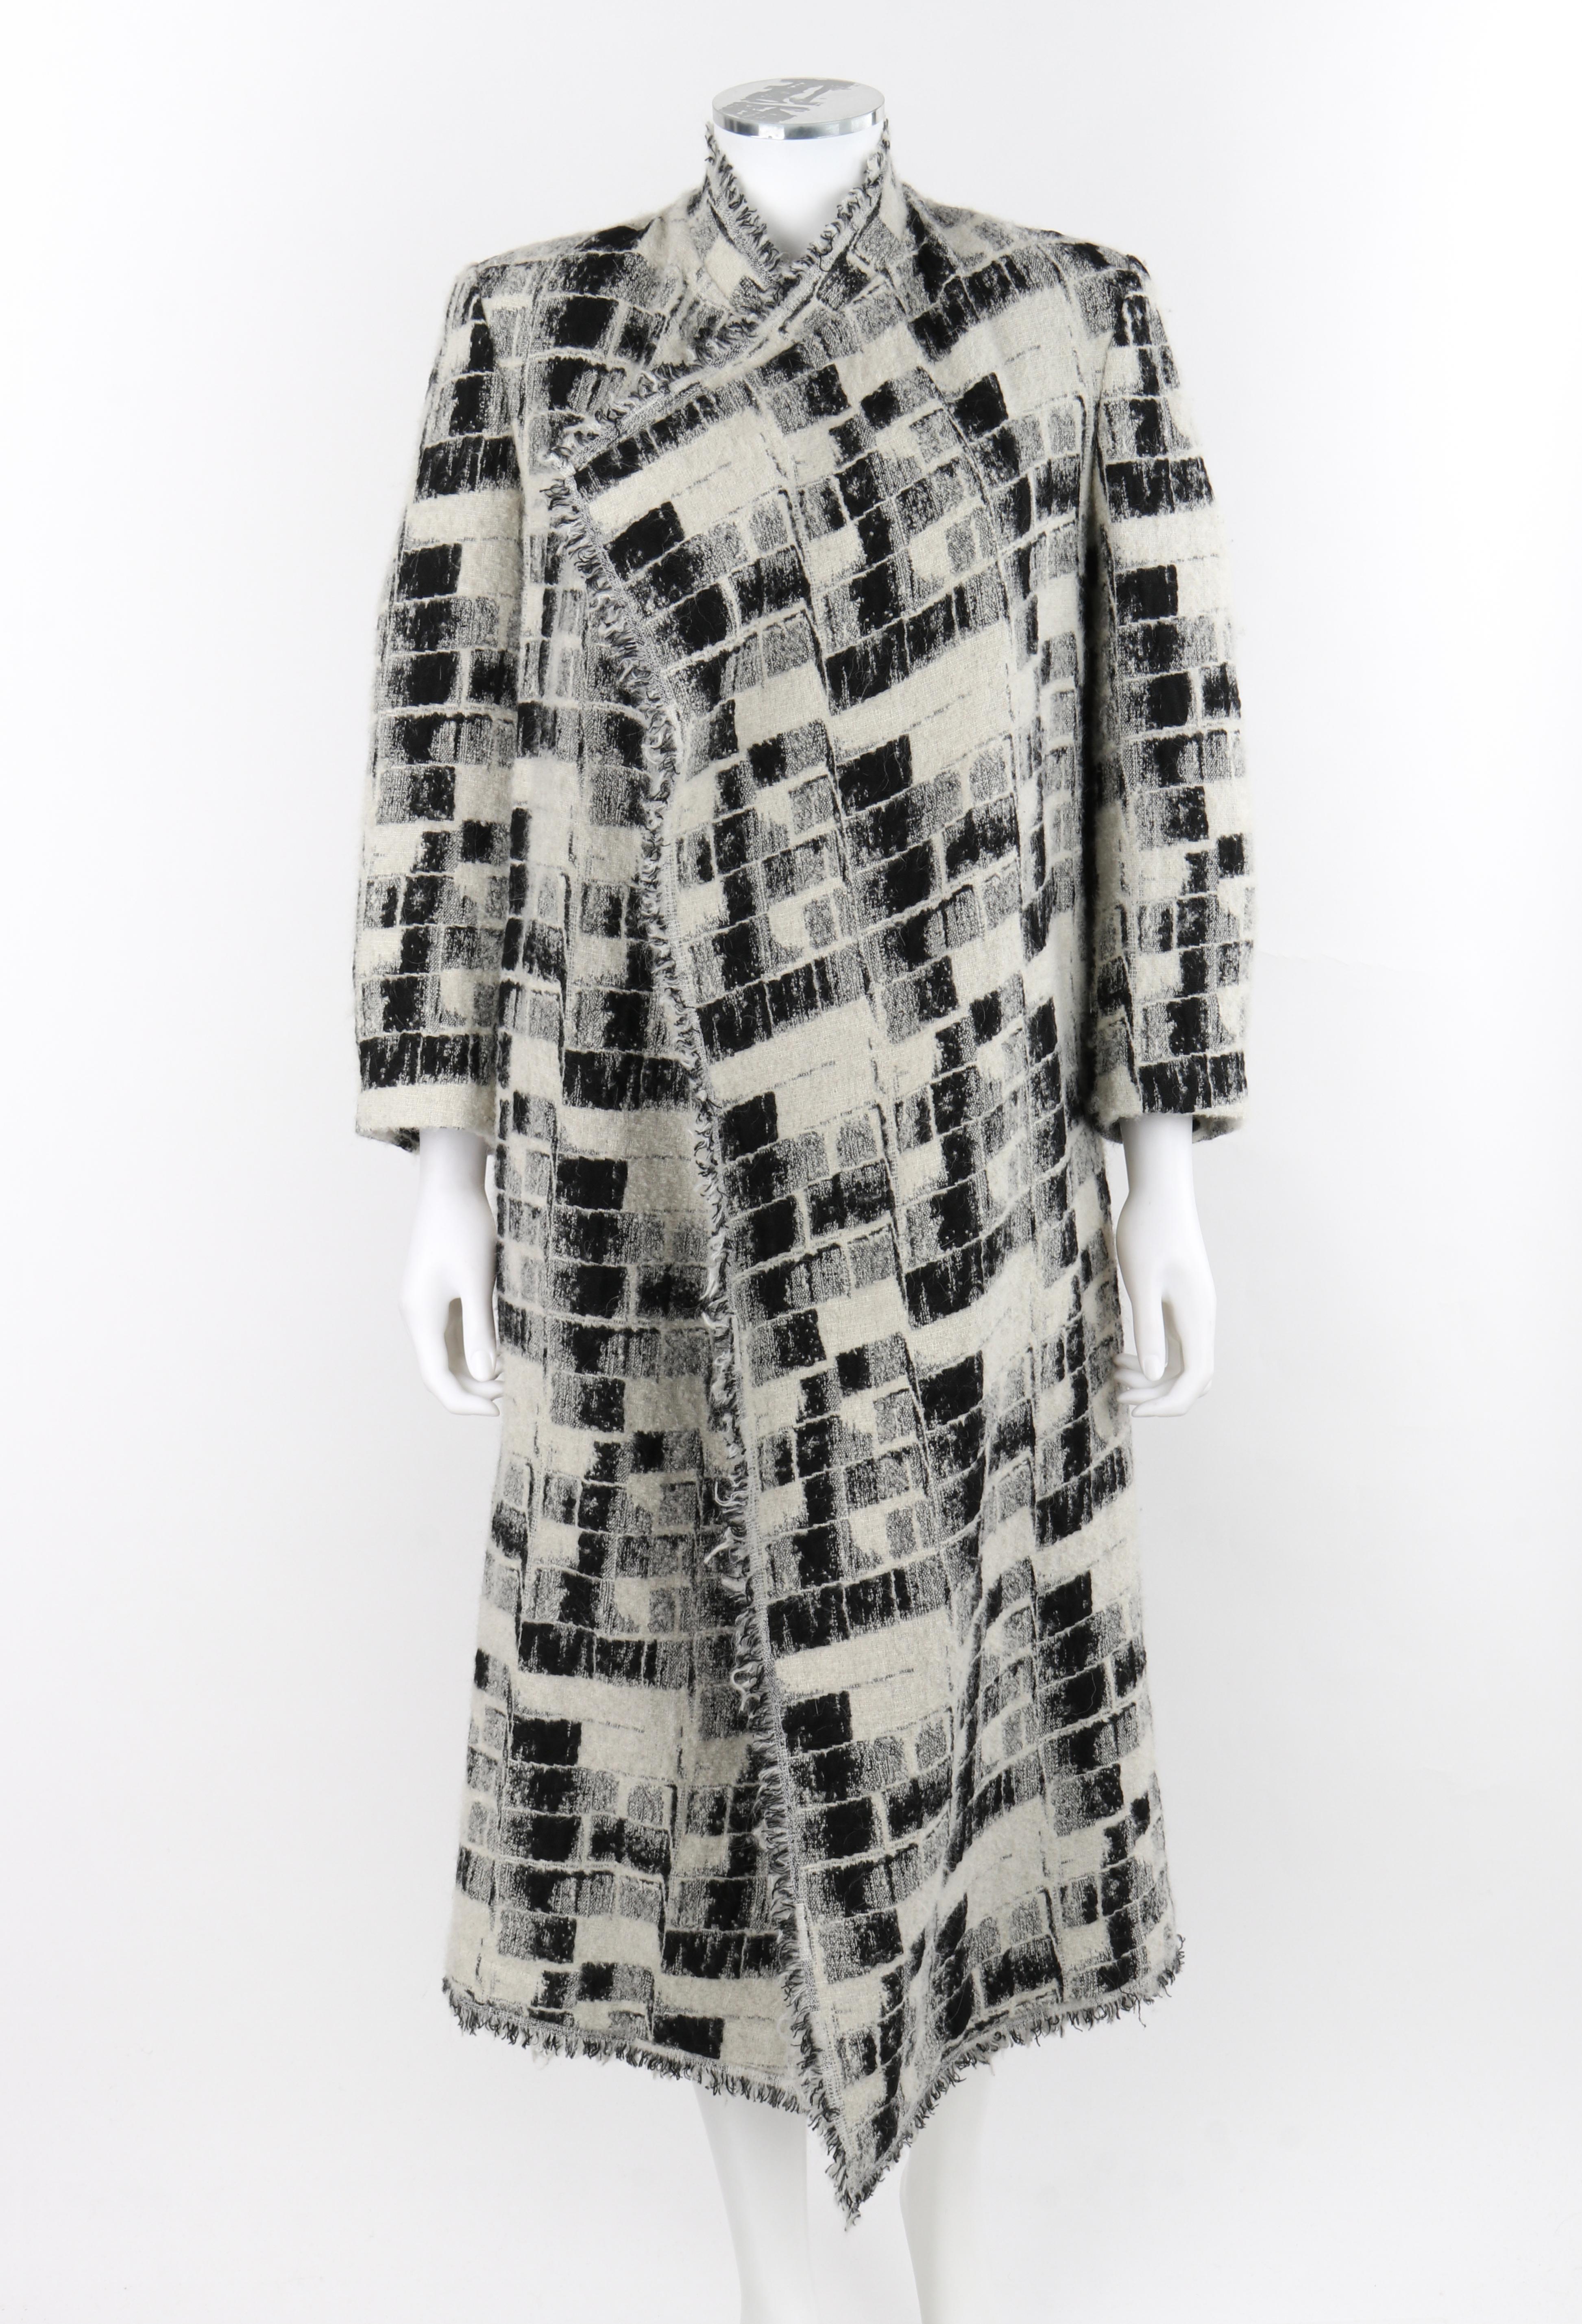 DONNA KARAN Pre-Fall 2015 Black White Checker Knit Open Cardigan Jacket In Good Condition For Sale In Thiensville, WI